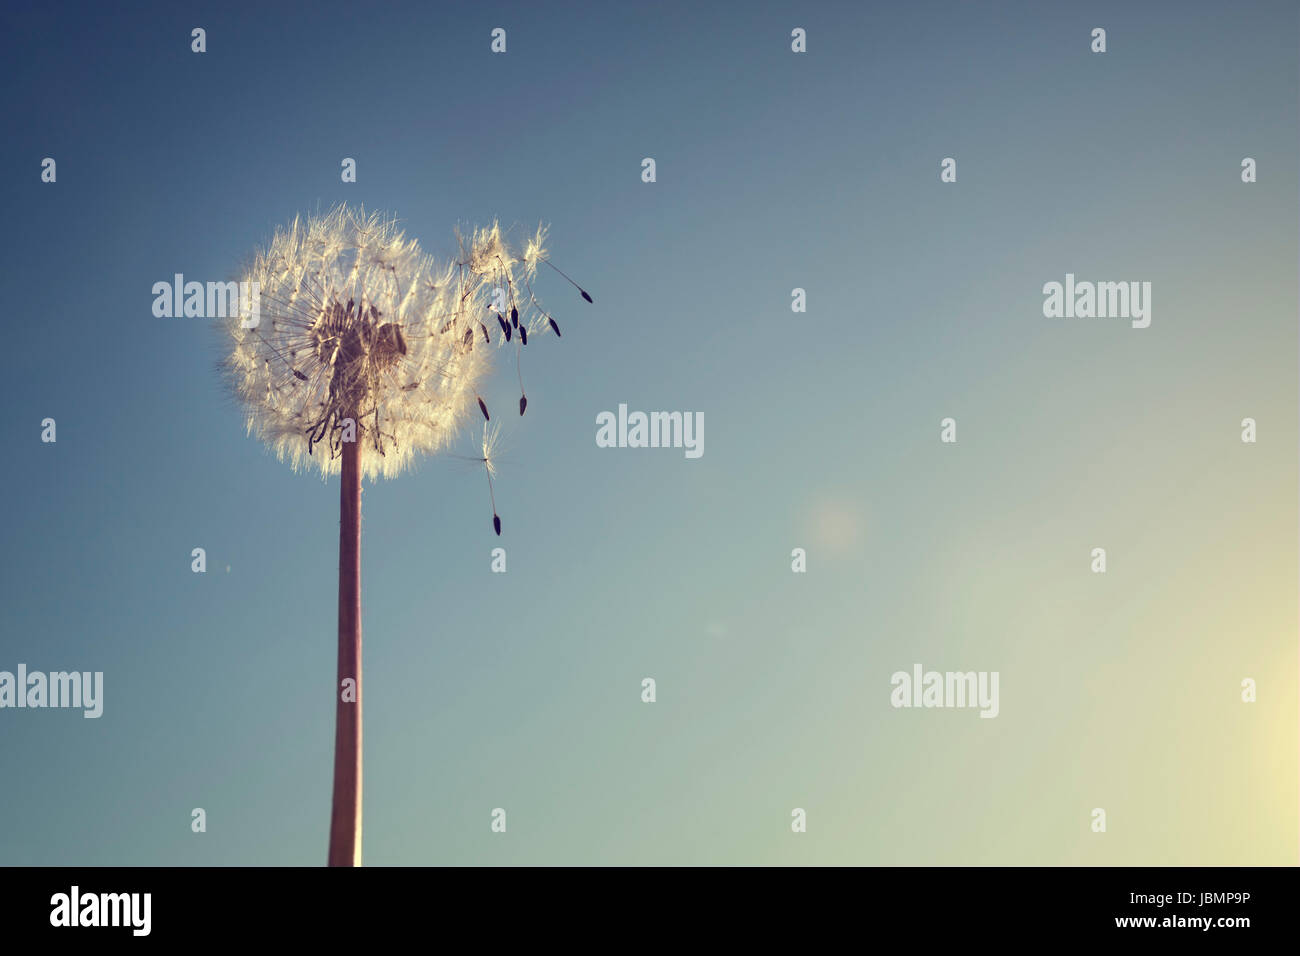 Dandelion silhouette against sunset with seeds blowing in the wind Stock Photo